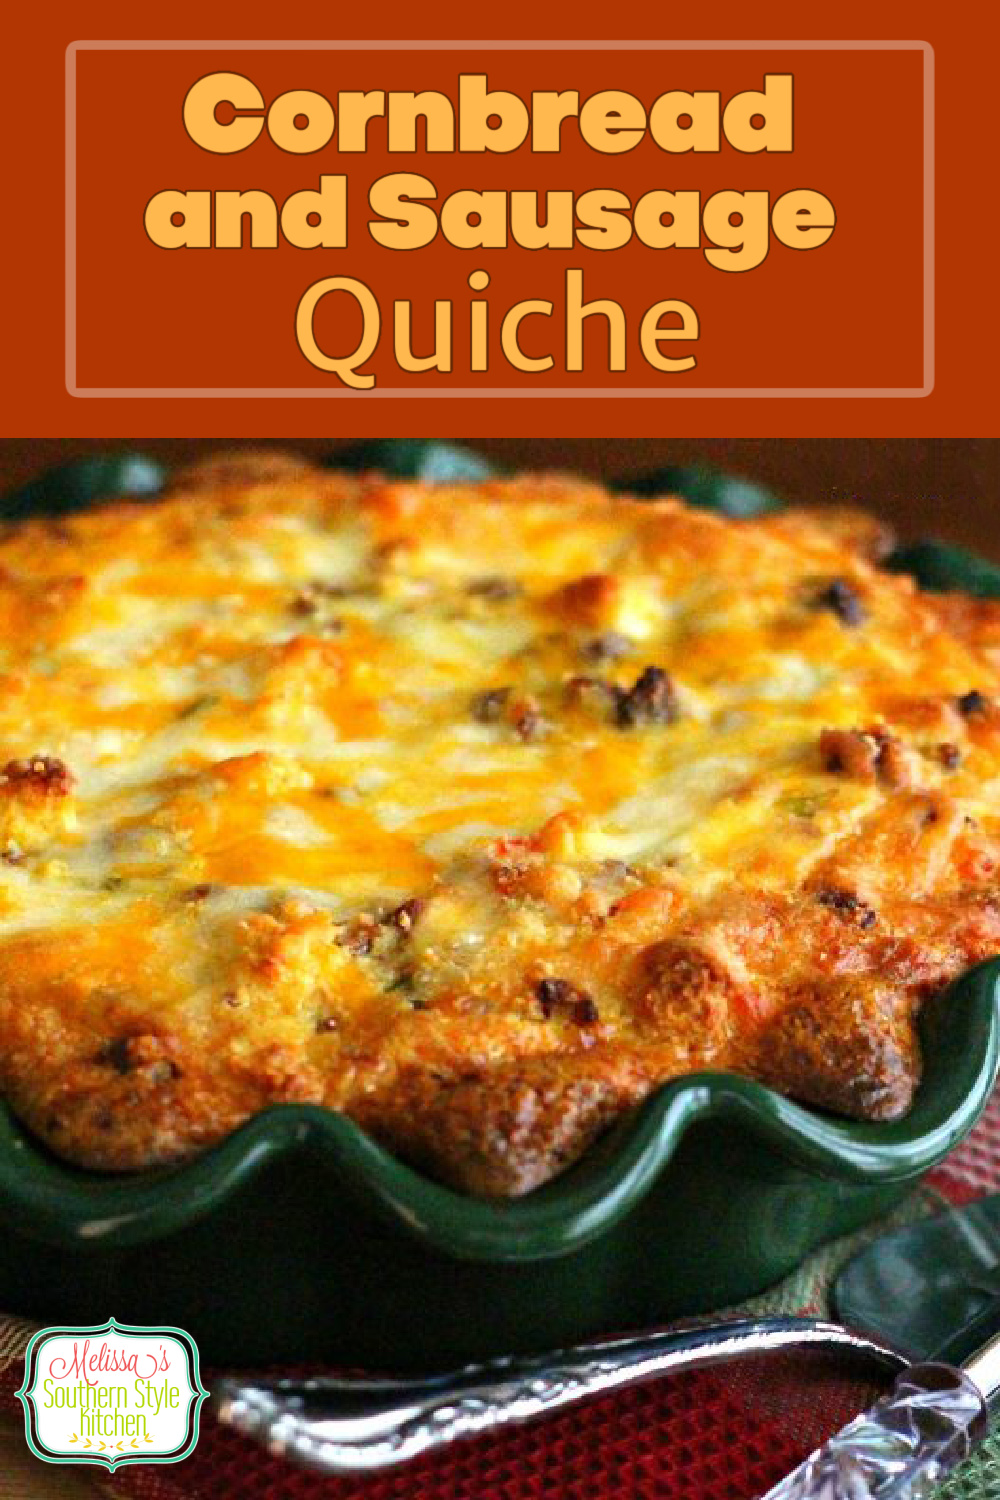 This amazing Cornbread and Sausage Quiche makes an any time of day meal #quiche #sausagequiche #cornbread #cornbreadquiche #sausage #breakfast #brunch #dinner #dinnerideas #southernfood #southernrecipes #melissassouthernstylekitchen